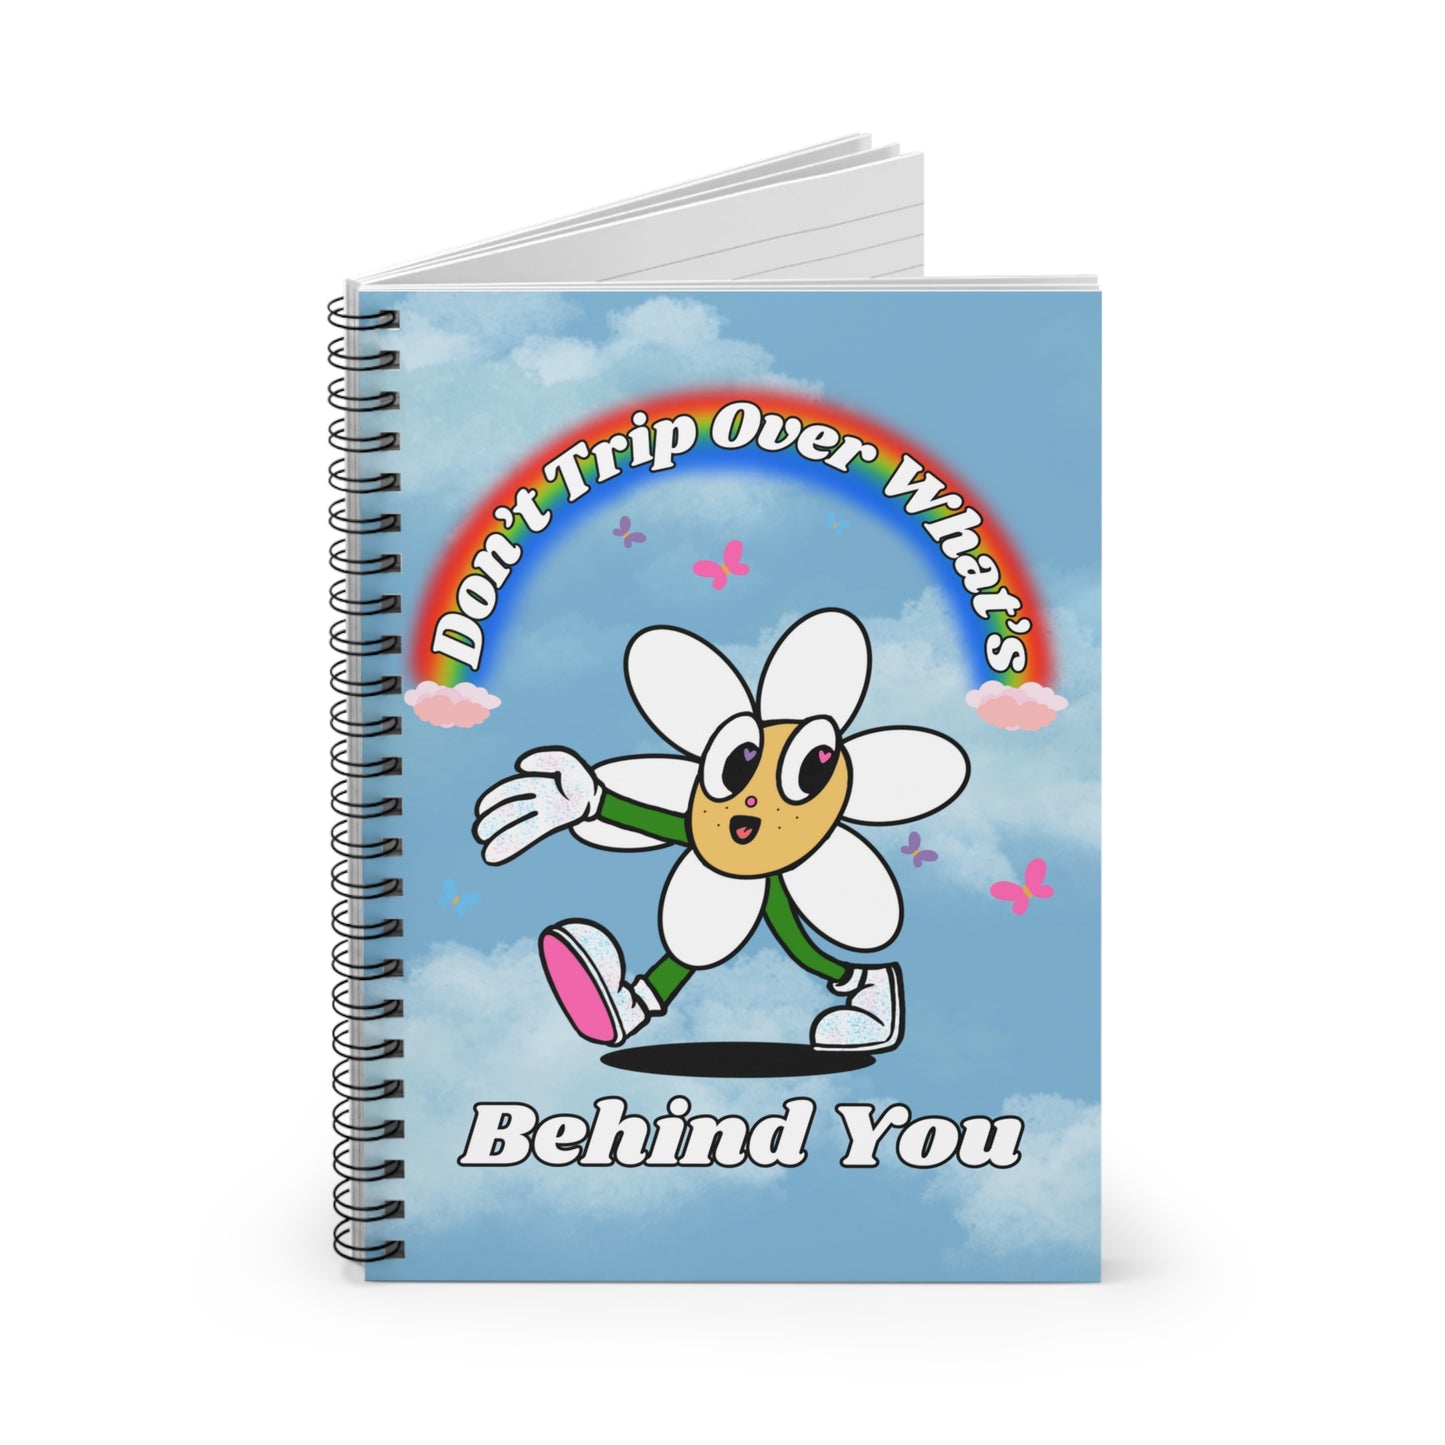 Don't Trip Over What's Behind You - Spiral Notebook